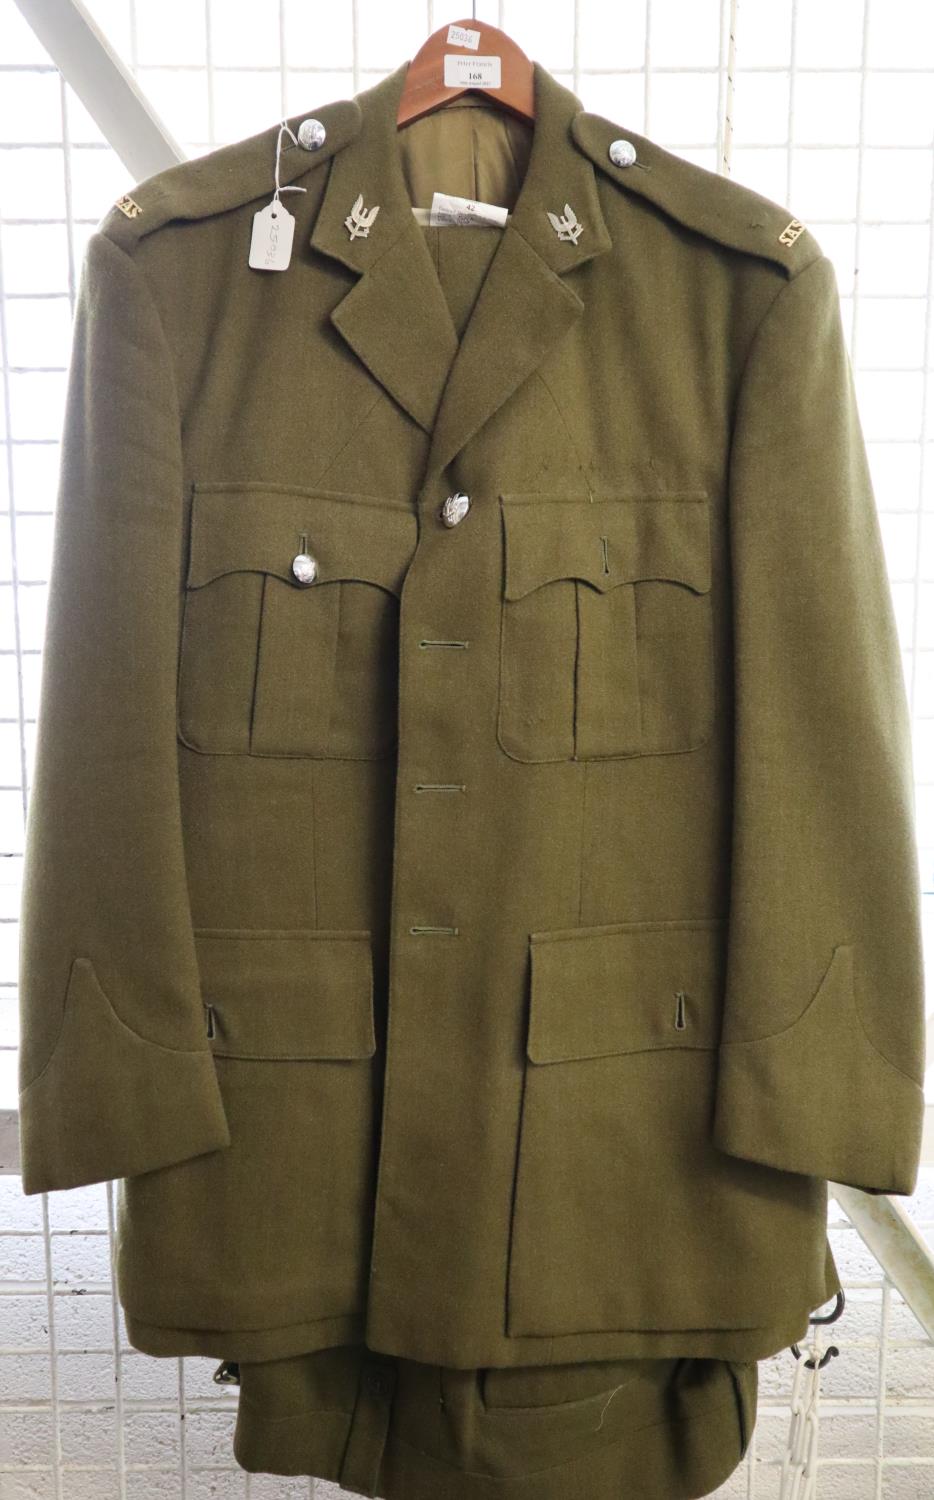 British Army Officer's long jacket with trousers, having SAS badges and insignia. (B.P. 21% + VAT)